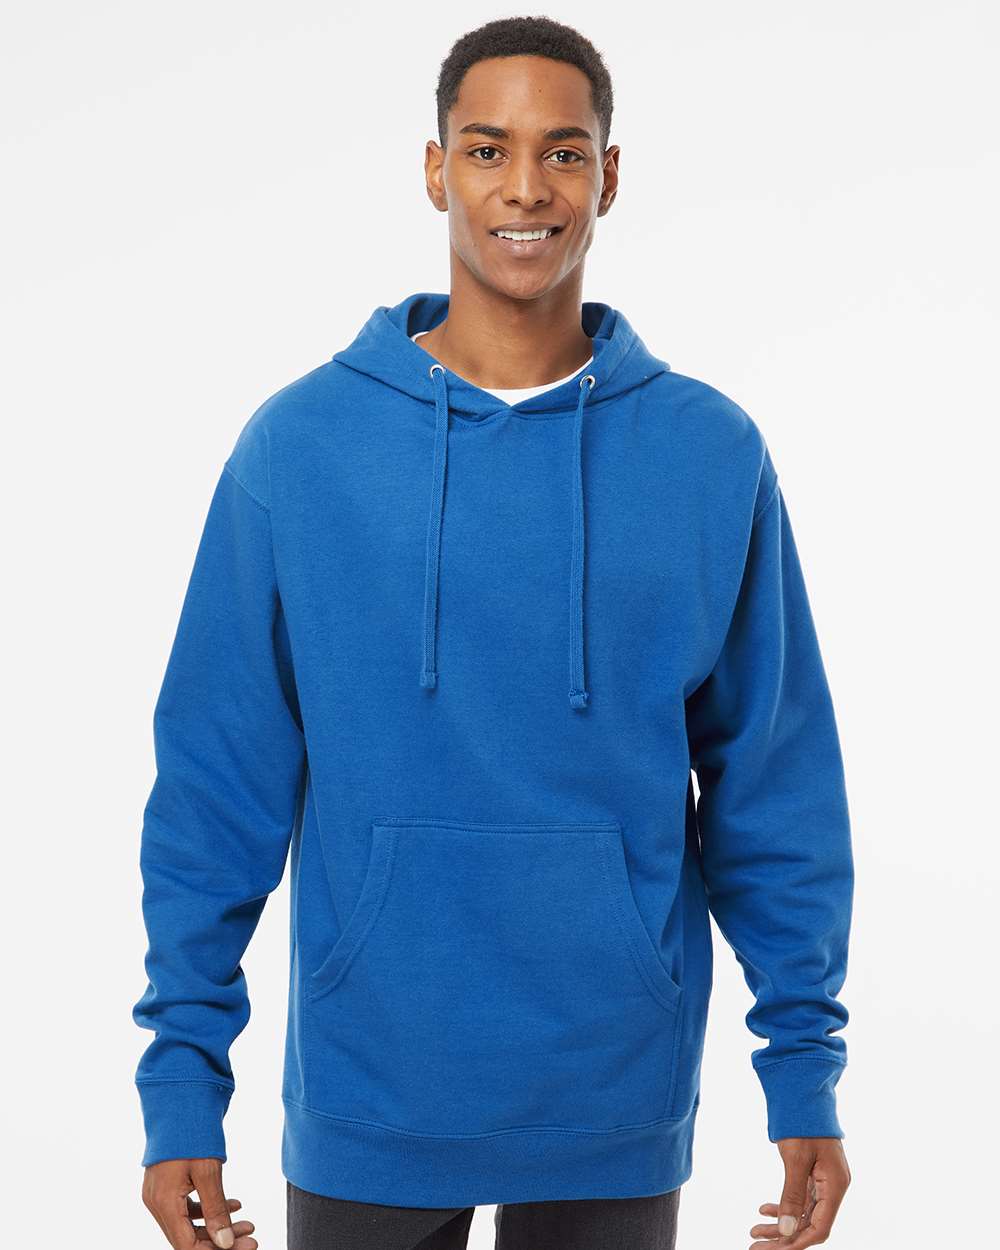 Midweight Hooded Men's Sweatshirt - Independent Trading Co. SS4500